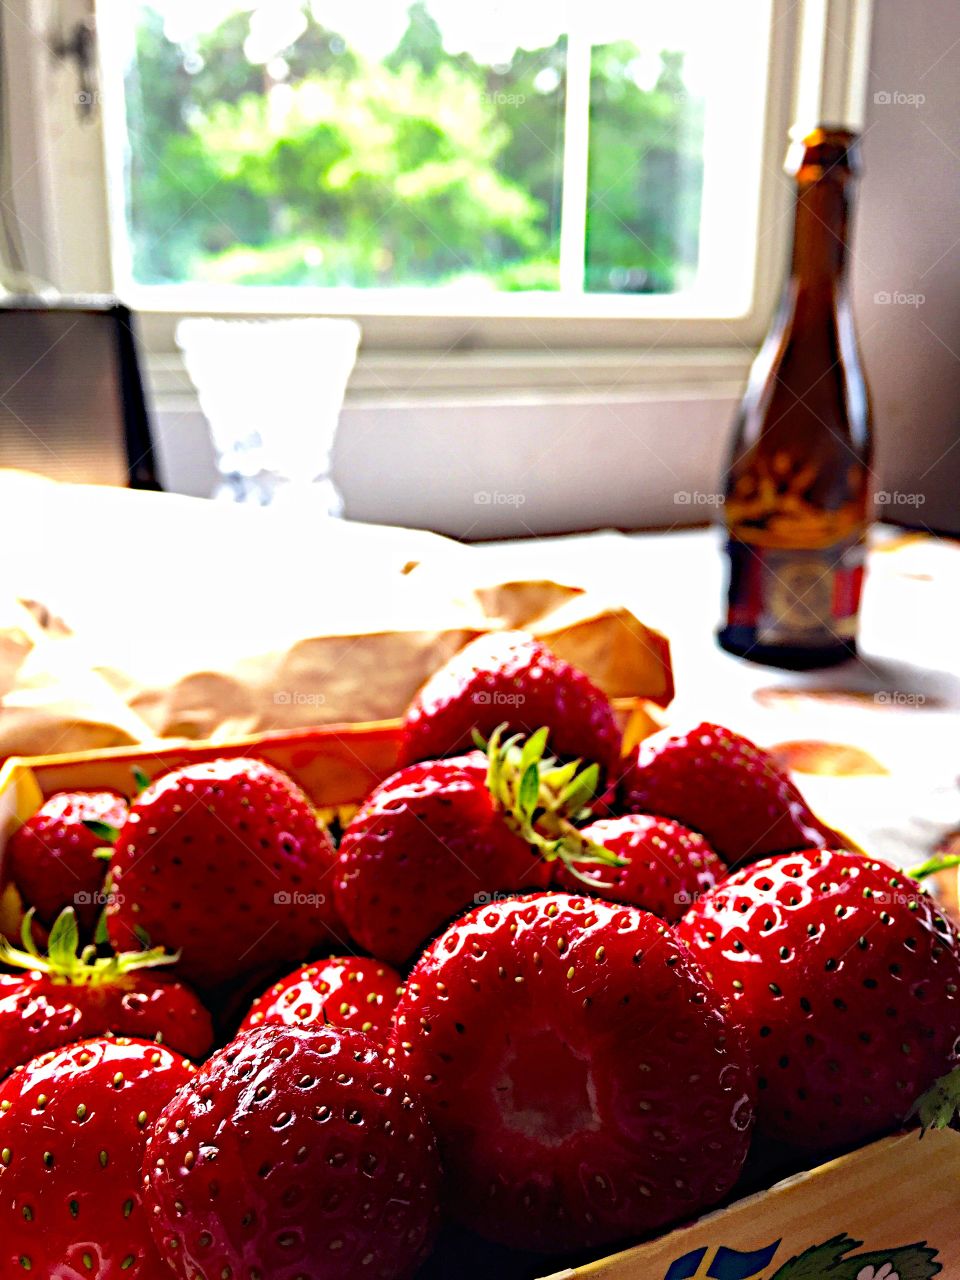 Strawberries on the table! 